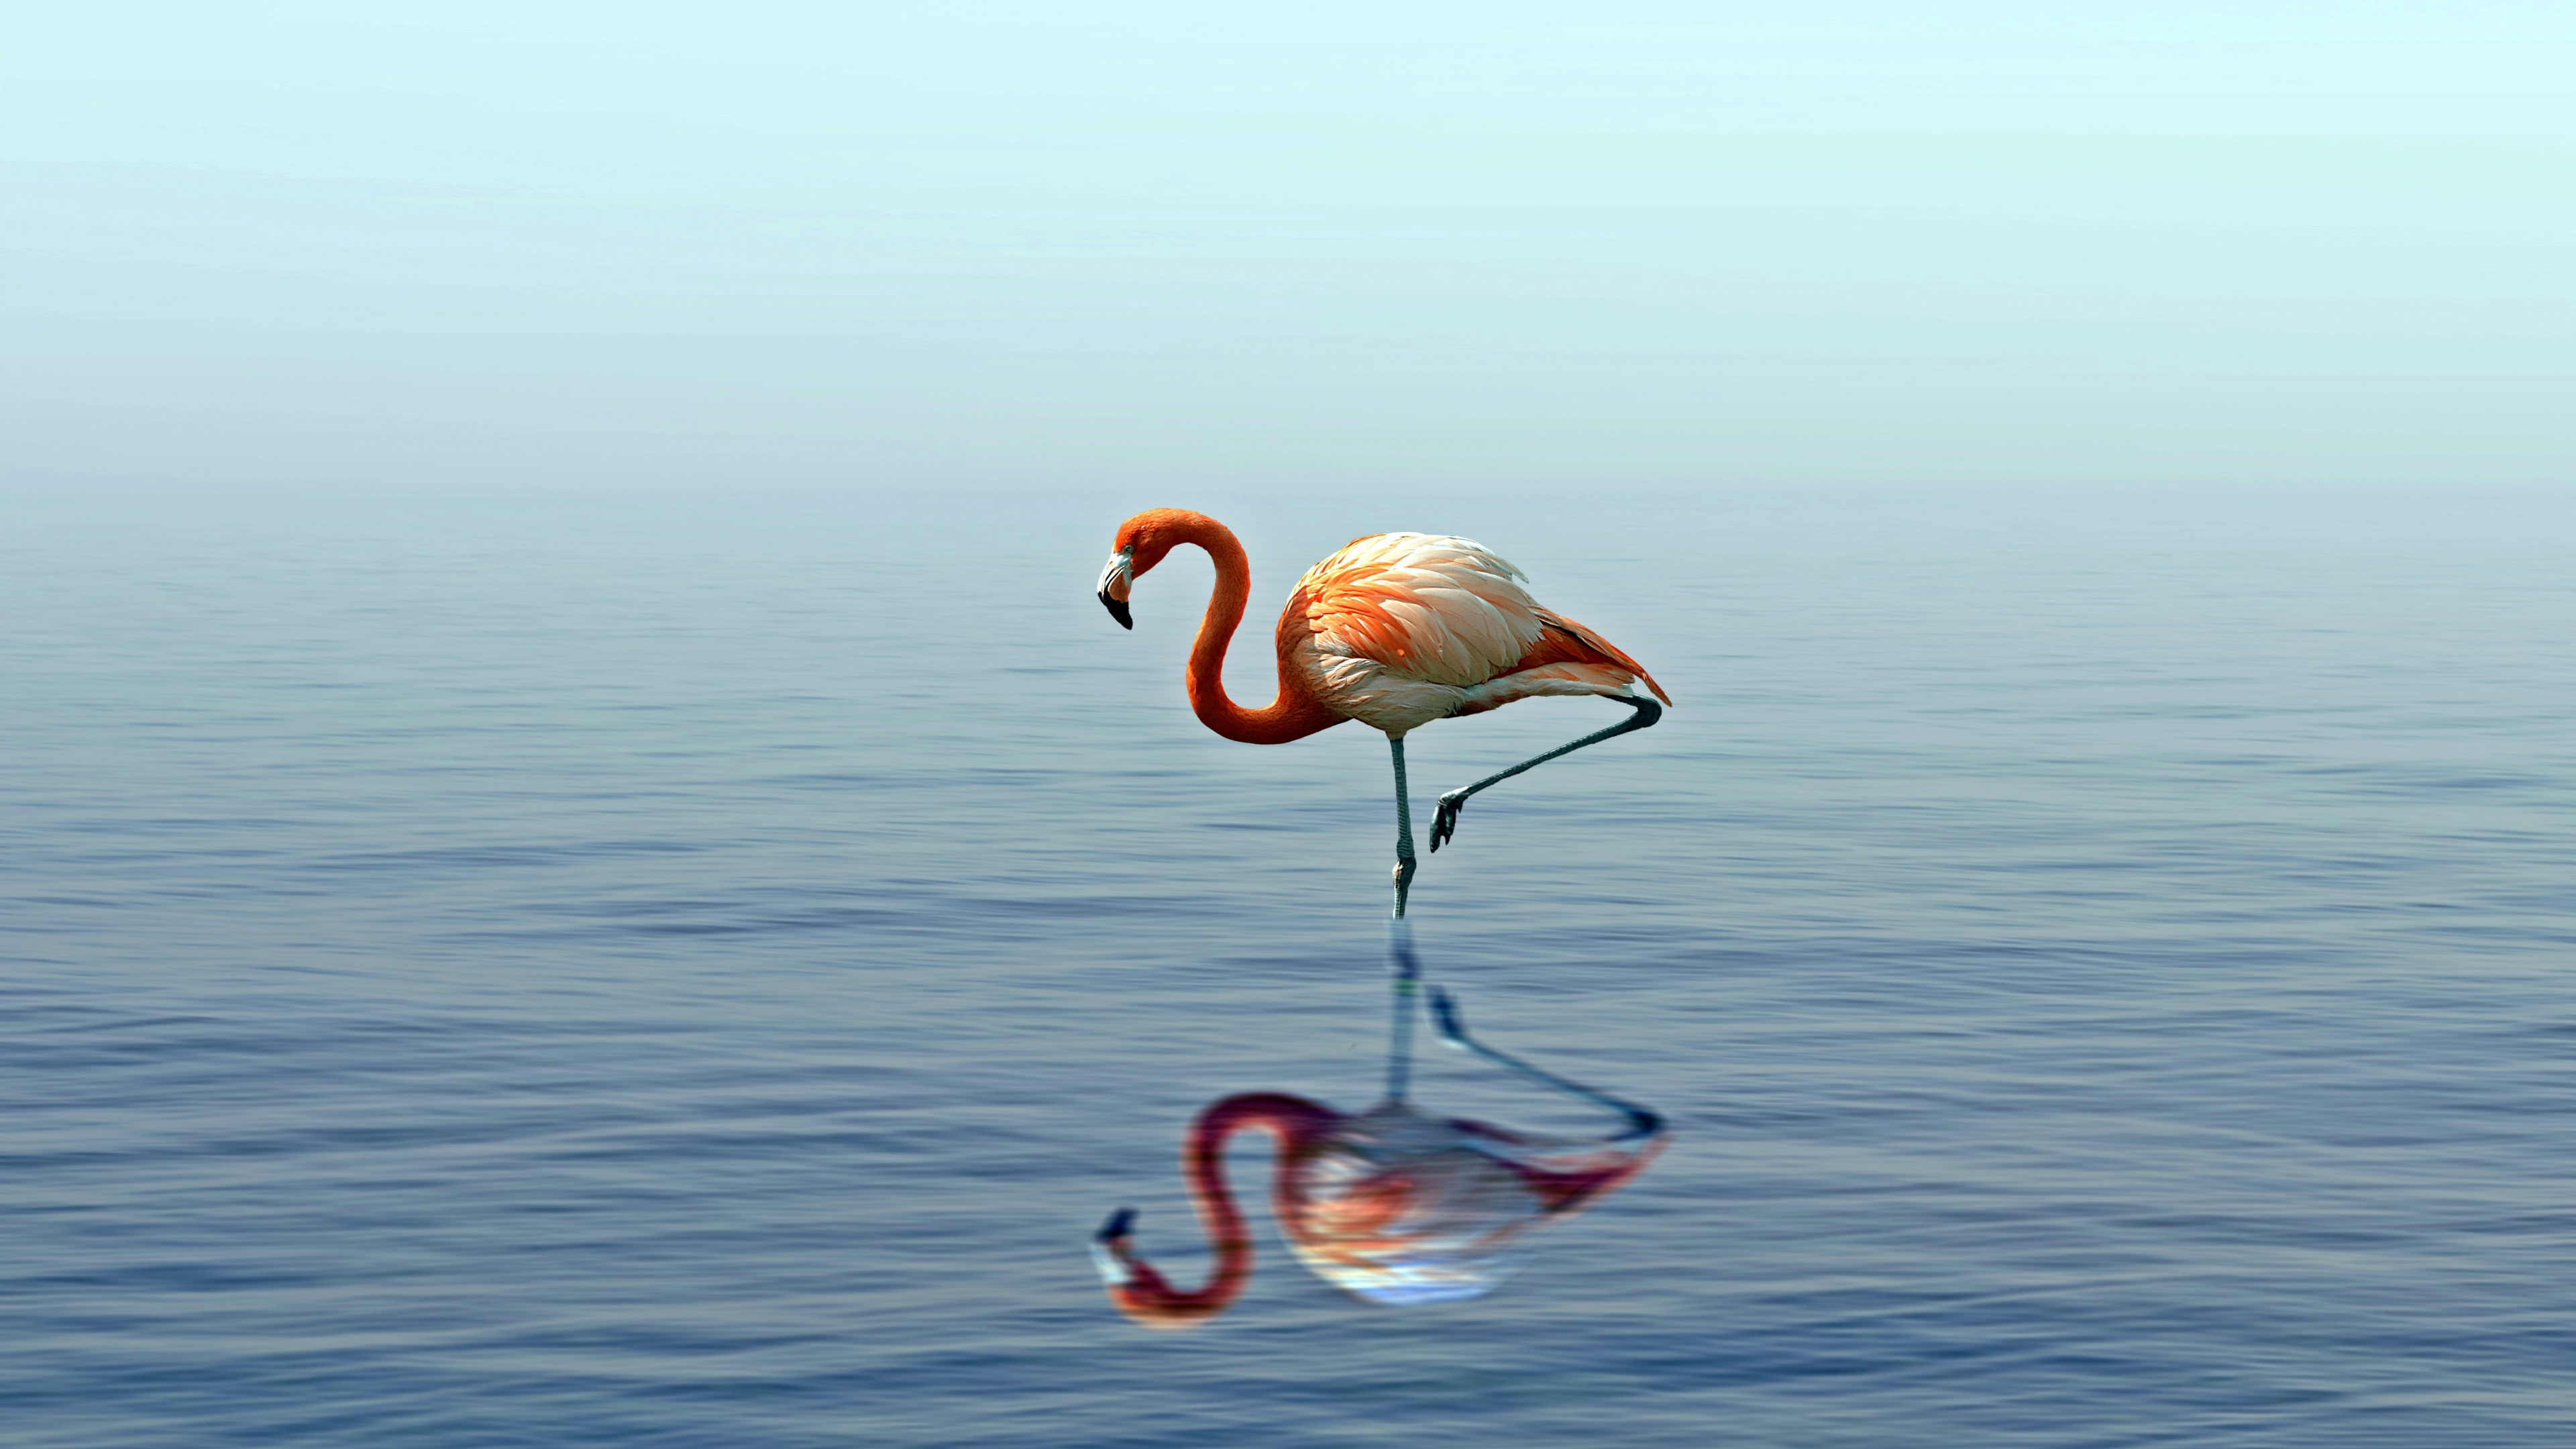 Pink Flamingo on Water During Daytime. Wallpaper in 3840x2160 Resolution